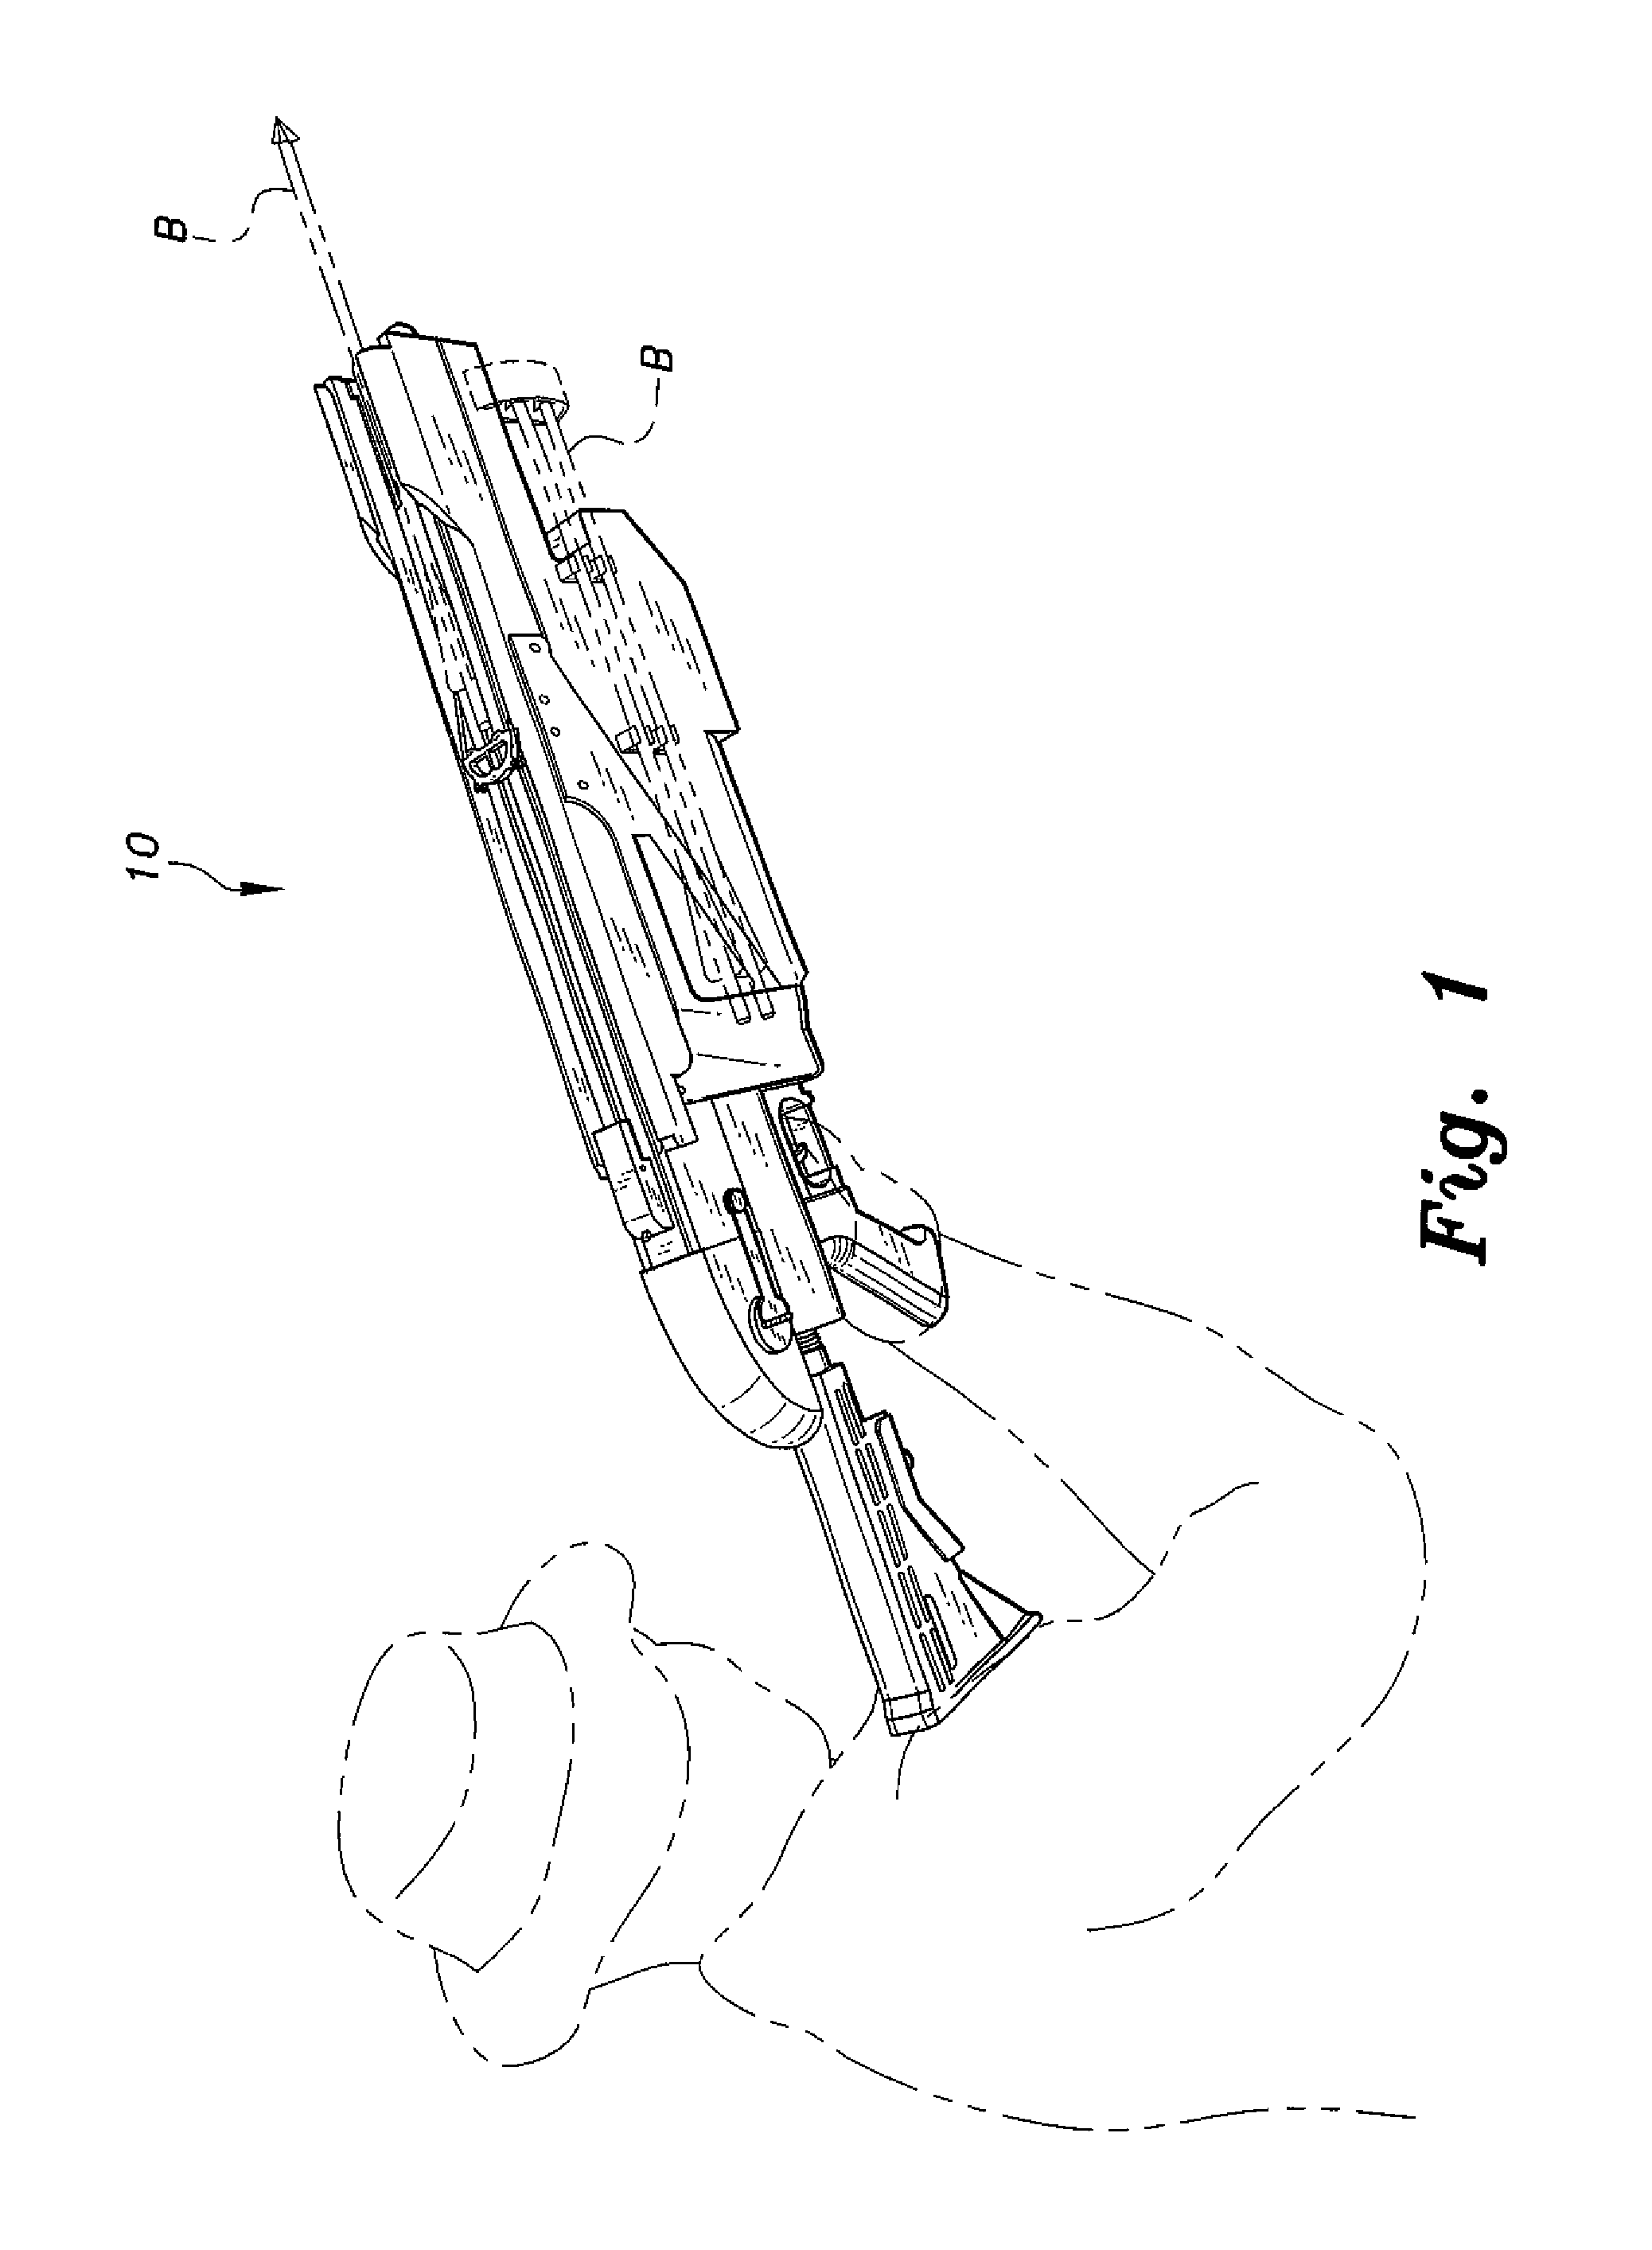 Projectile launcher with internal bow